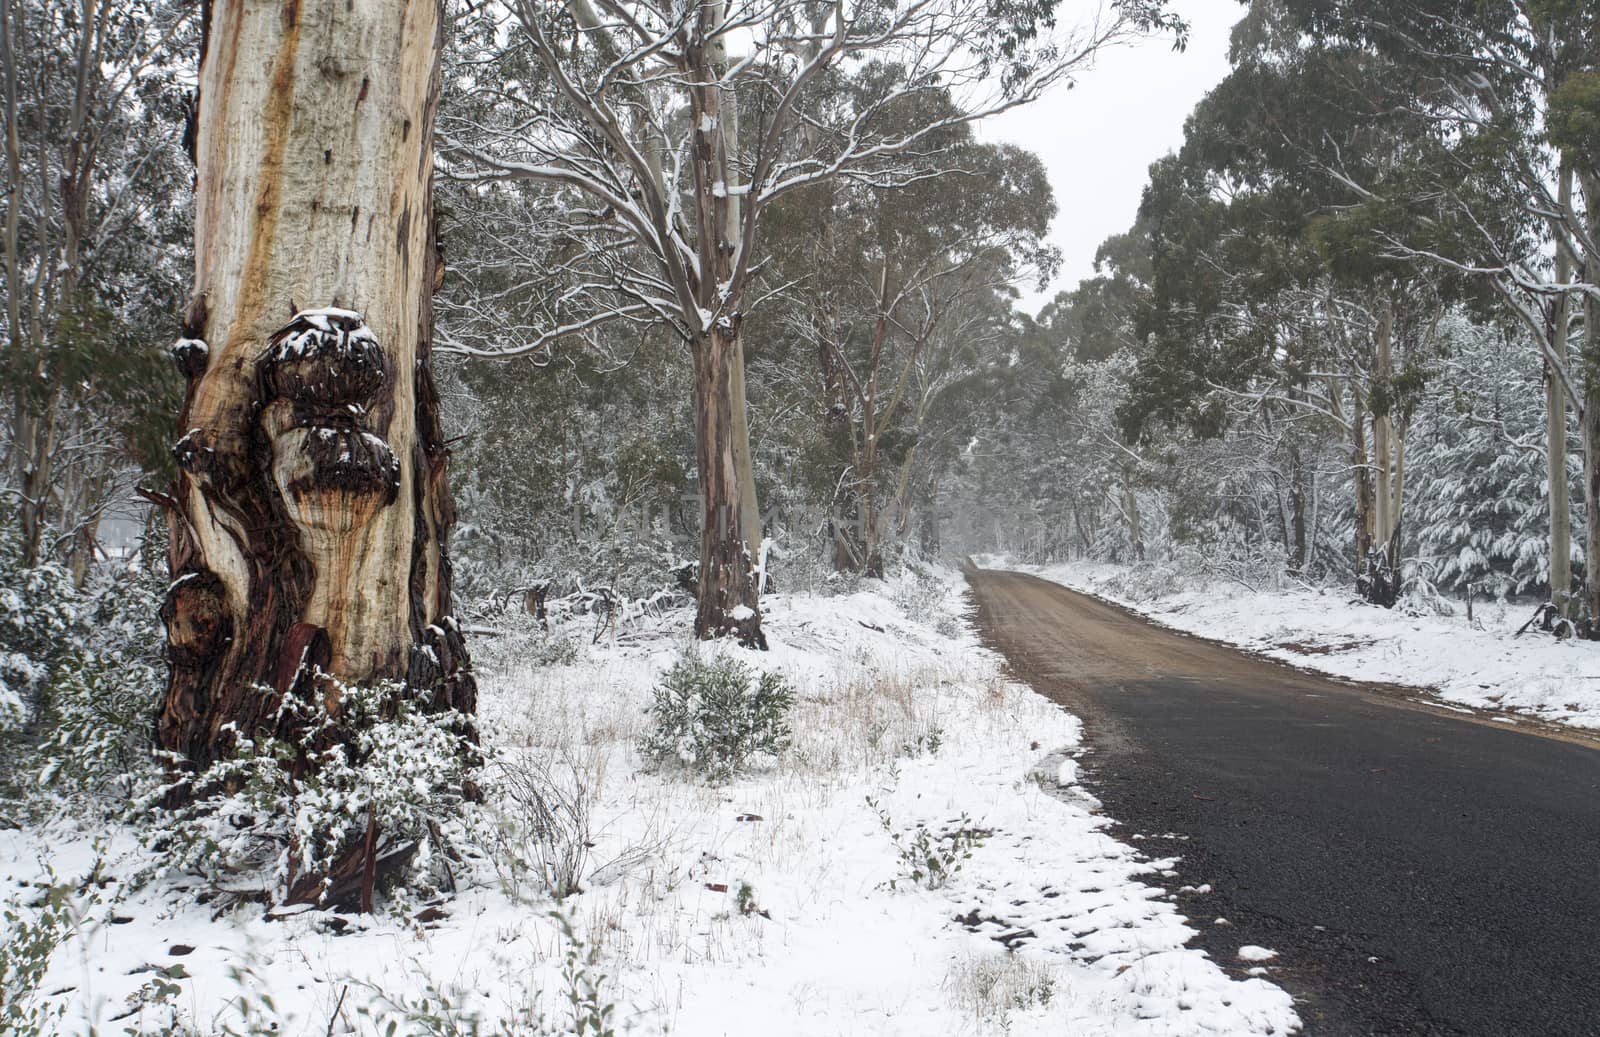 Australian gum trees in the snow by lovleah